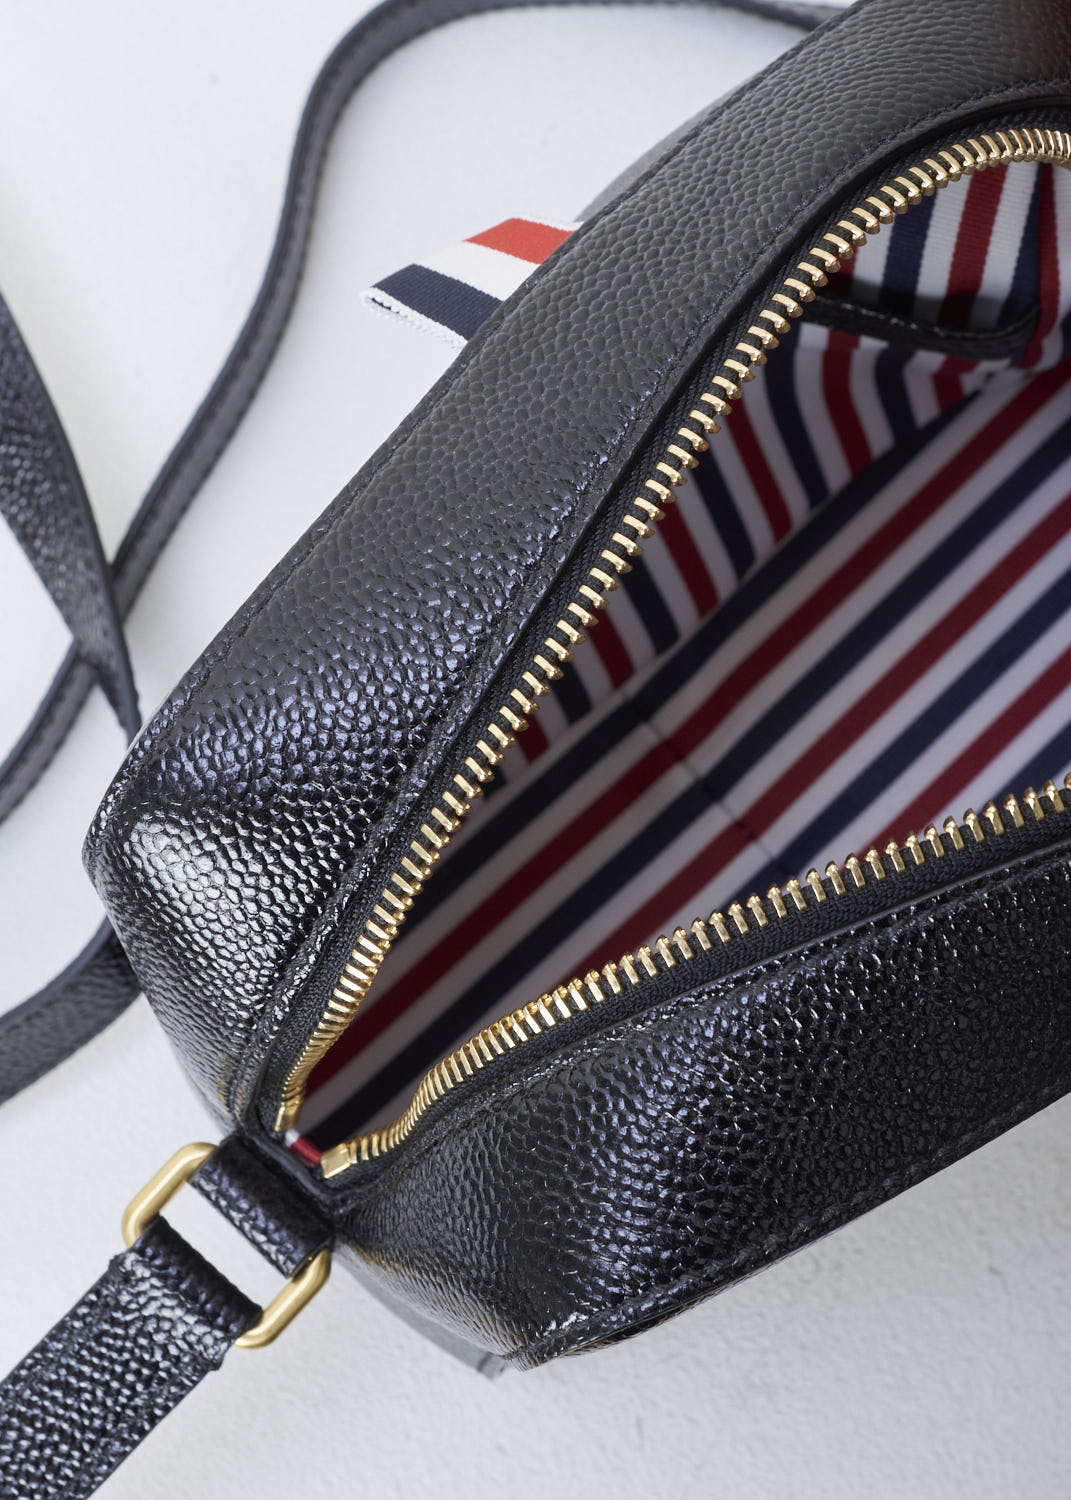 THOM BROWNE, CROSS BODY BAG WITH BOW DETAIL IN THE SIGNATURE TRI-COLOR STRIPE, FAP116A_03542_001, Black, Print, Detail 1, Leather cross body bag with a bow detail in the signature tri-color grosgrain stripe in the front and a single tri-colored tab on the back. This model is made with pebble grain leather. Up top, a gold-toned zipper gives access to the interior of the bag. The bag opens up to a single spacious compartment with on one side, a single patch pocket against the back wall. 


Size: 17 cm x 13 cm x 7 cm / 6.6 inch x 5.1 inch x 2.7 inch 
